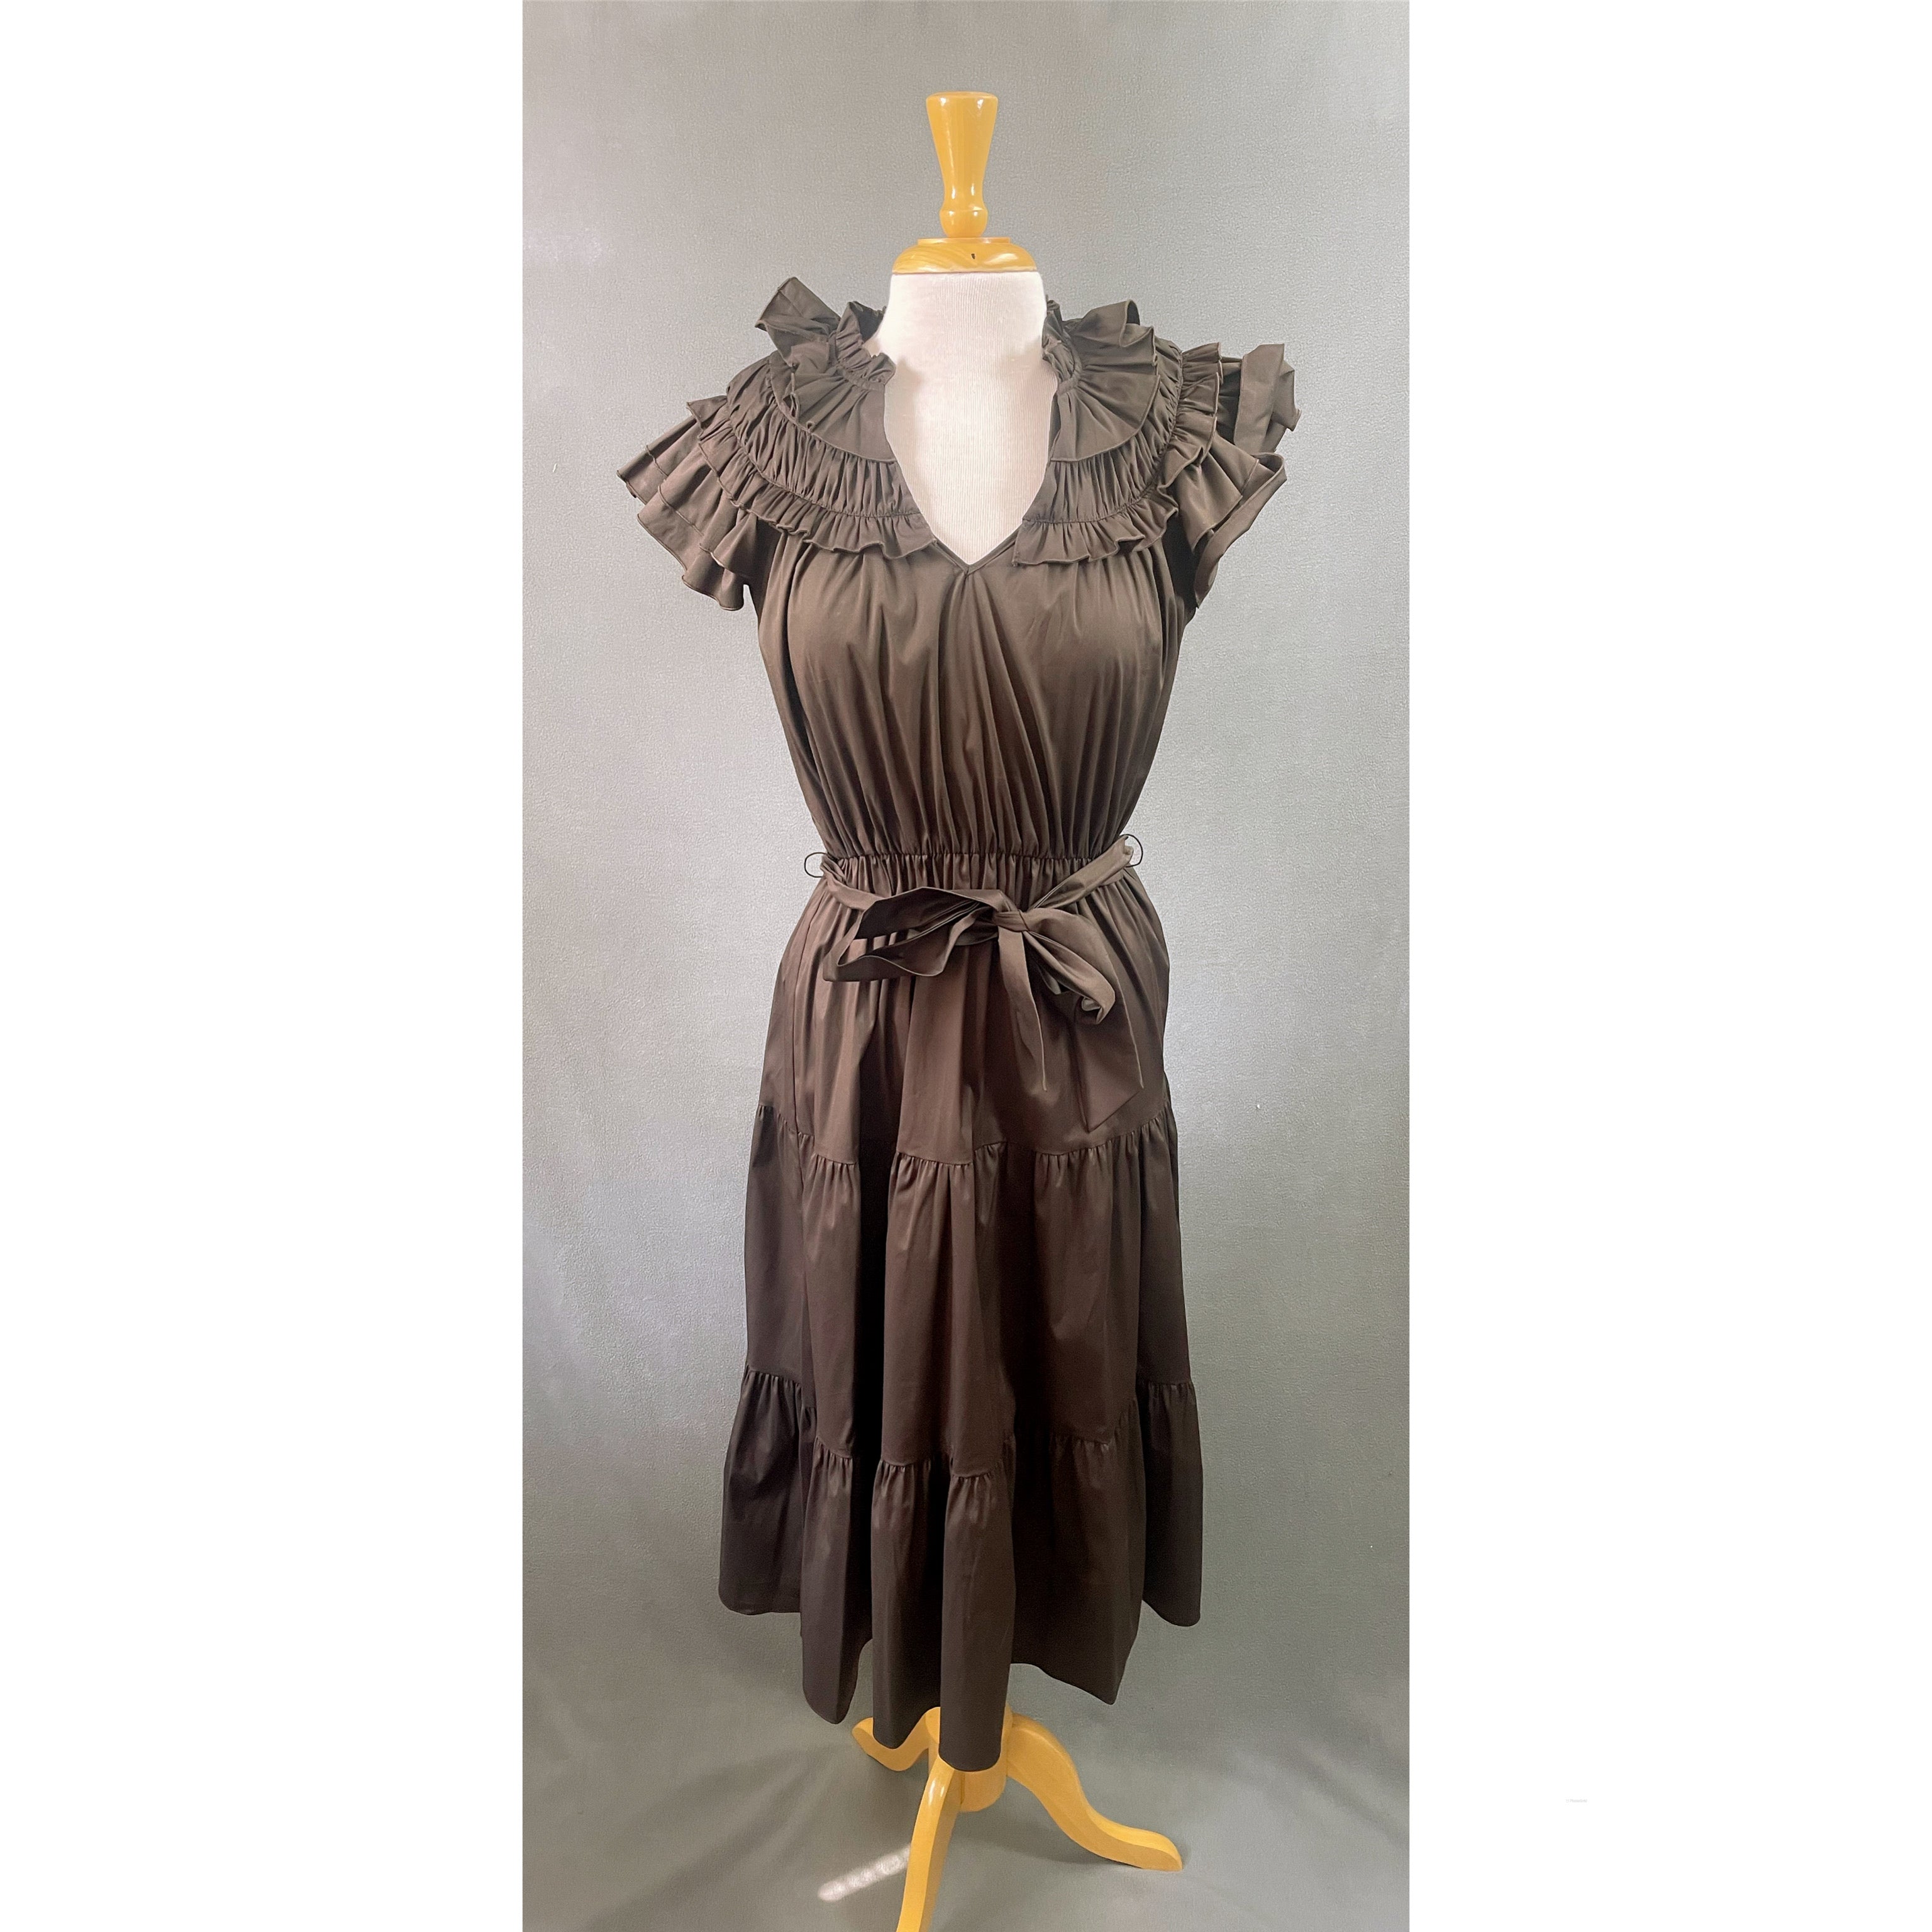 Willa Story brown Bailey dress, size S, NEW WITH TAGS!